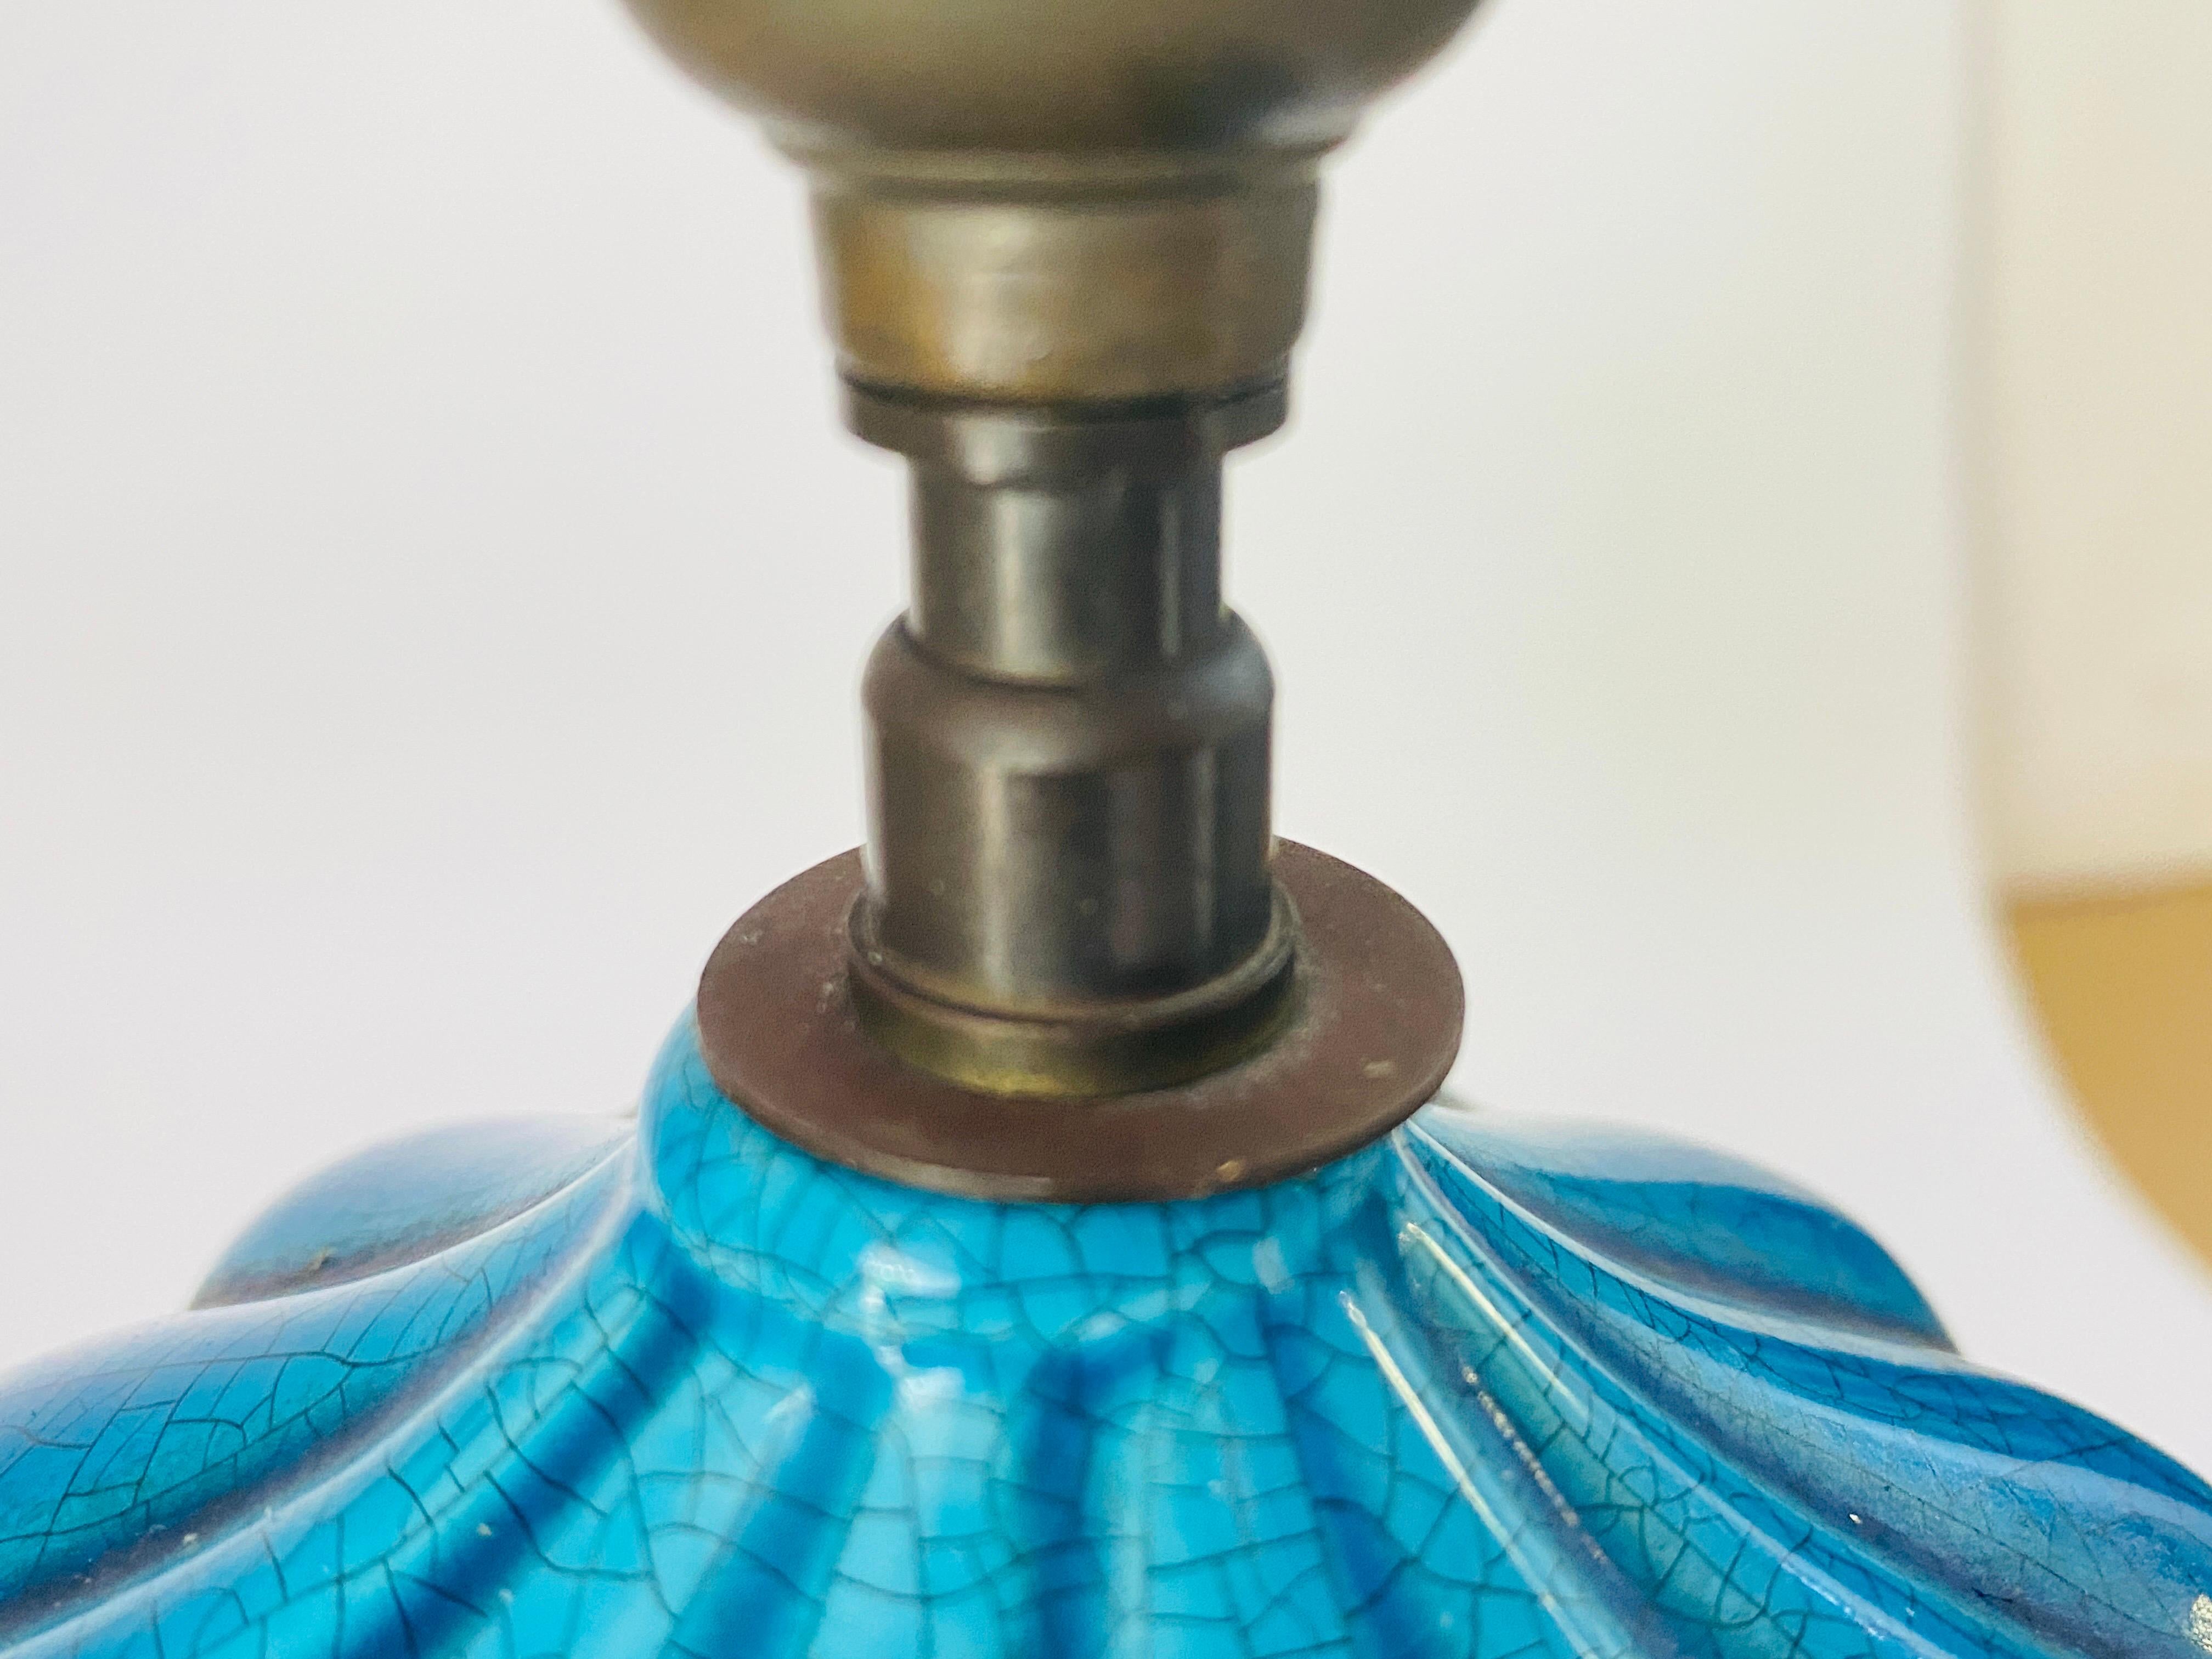 Table Lamp in Crakled Enemeled Blue Ceramic, France, 1970 In Good Condition For Sale In Auribeau sur Siagne, FR